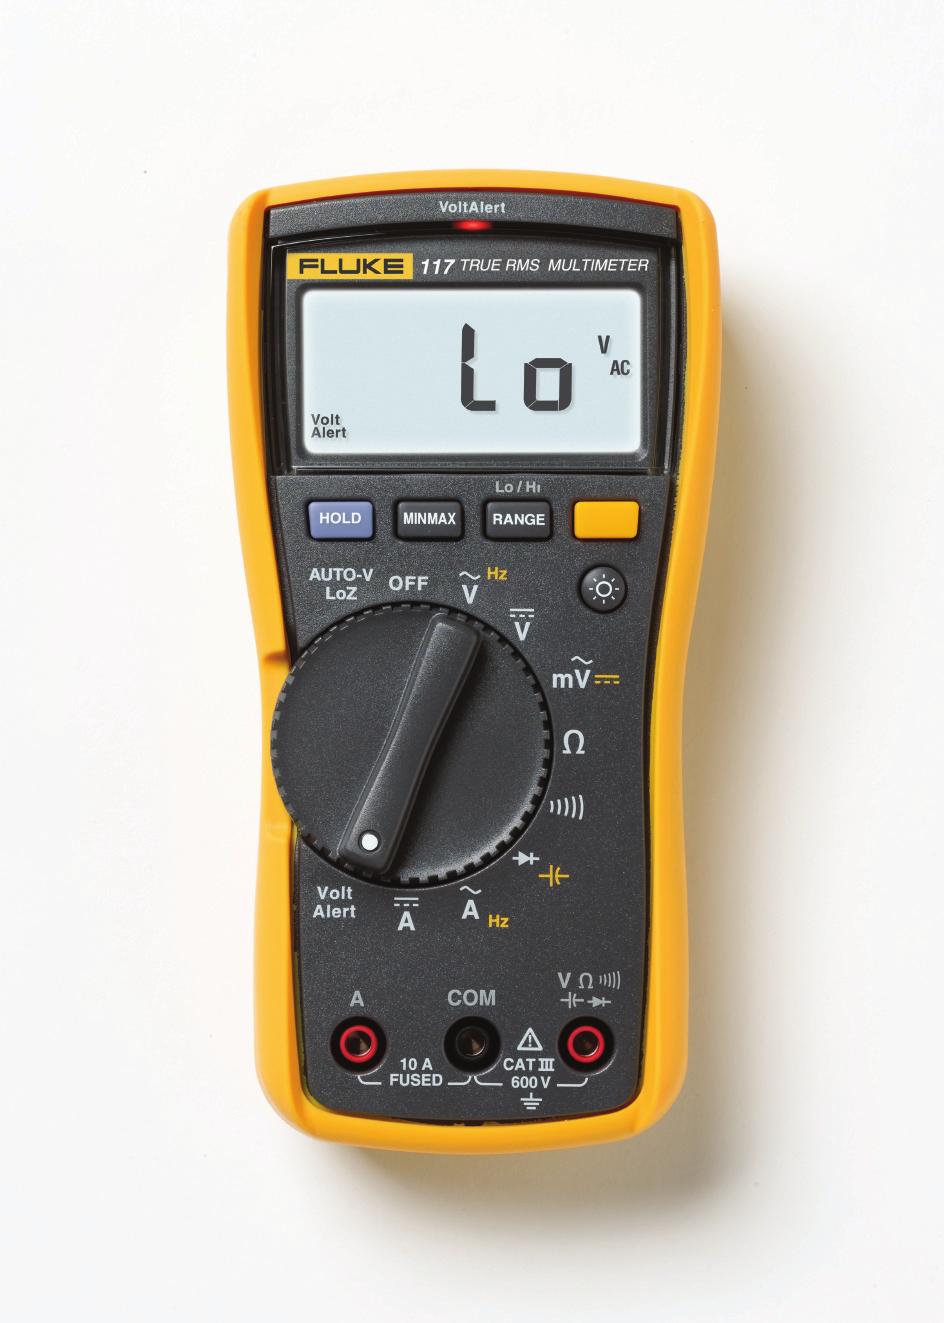 Fluke 117 Electrician s Multimeter with Non-Contact Voltage Technical Data Compact true-rms meter for commercial applications The Fluke 117 is the ideal meter for demanding settings like commercial